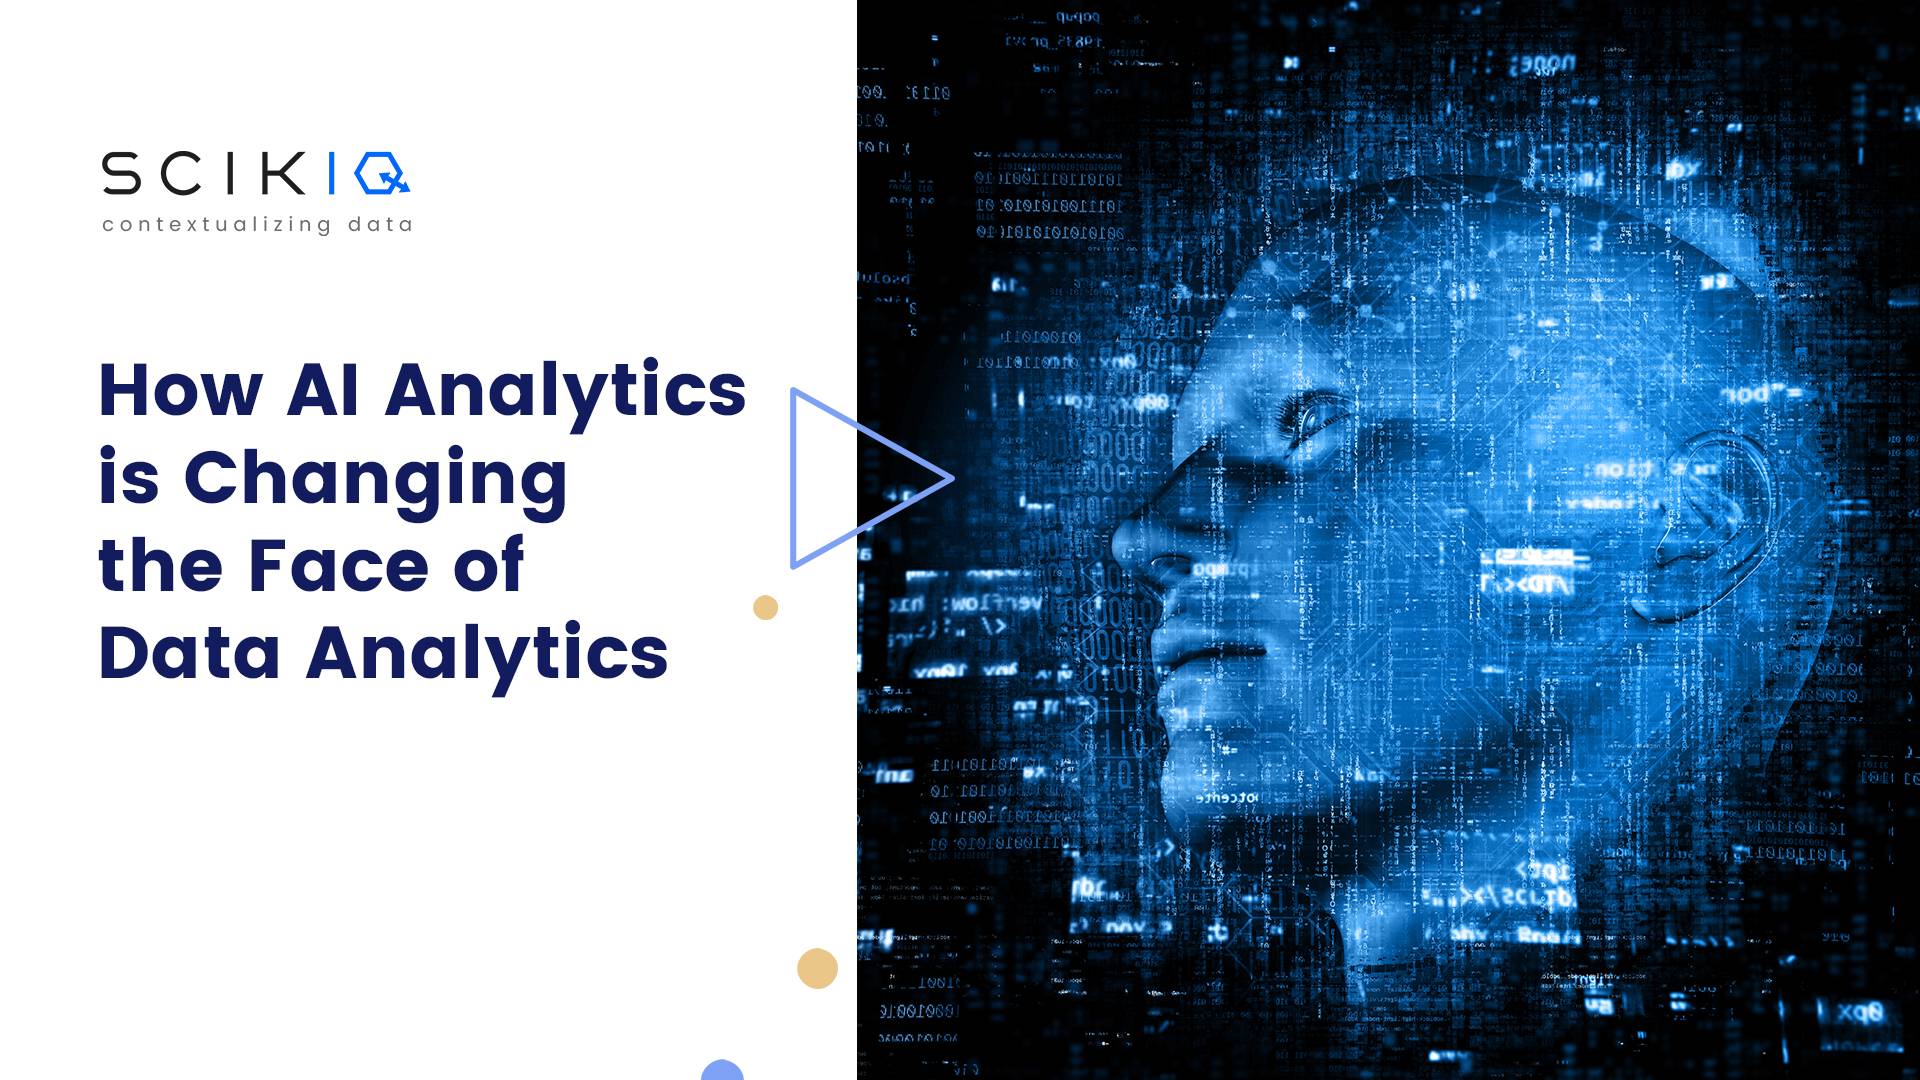 How AI Analytics is Changing the Face of Data Analytics